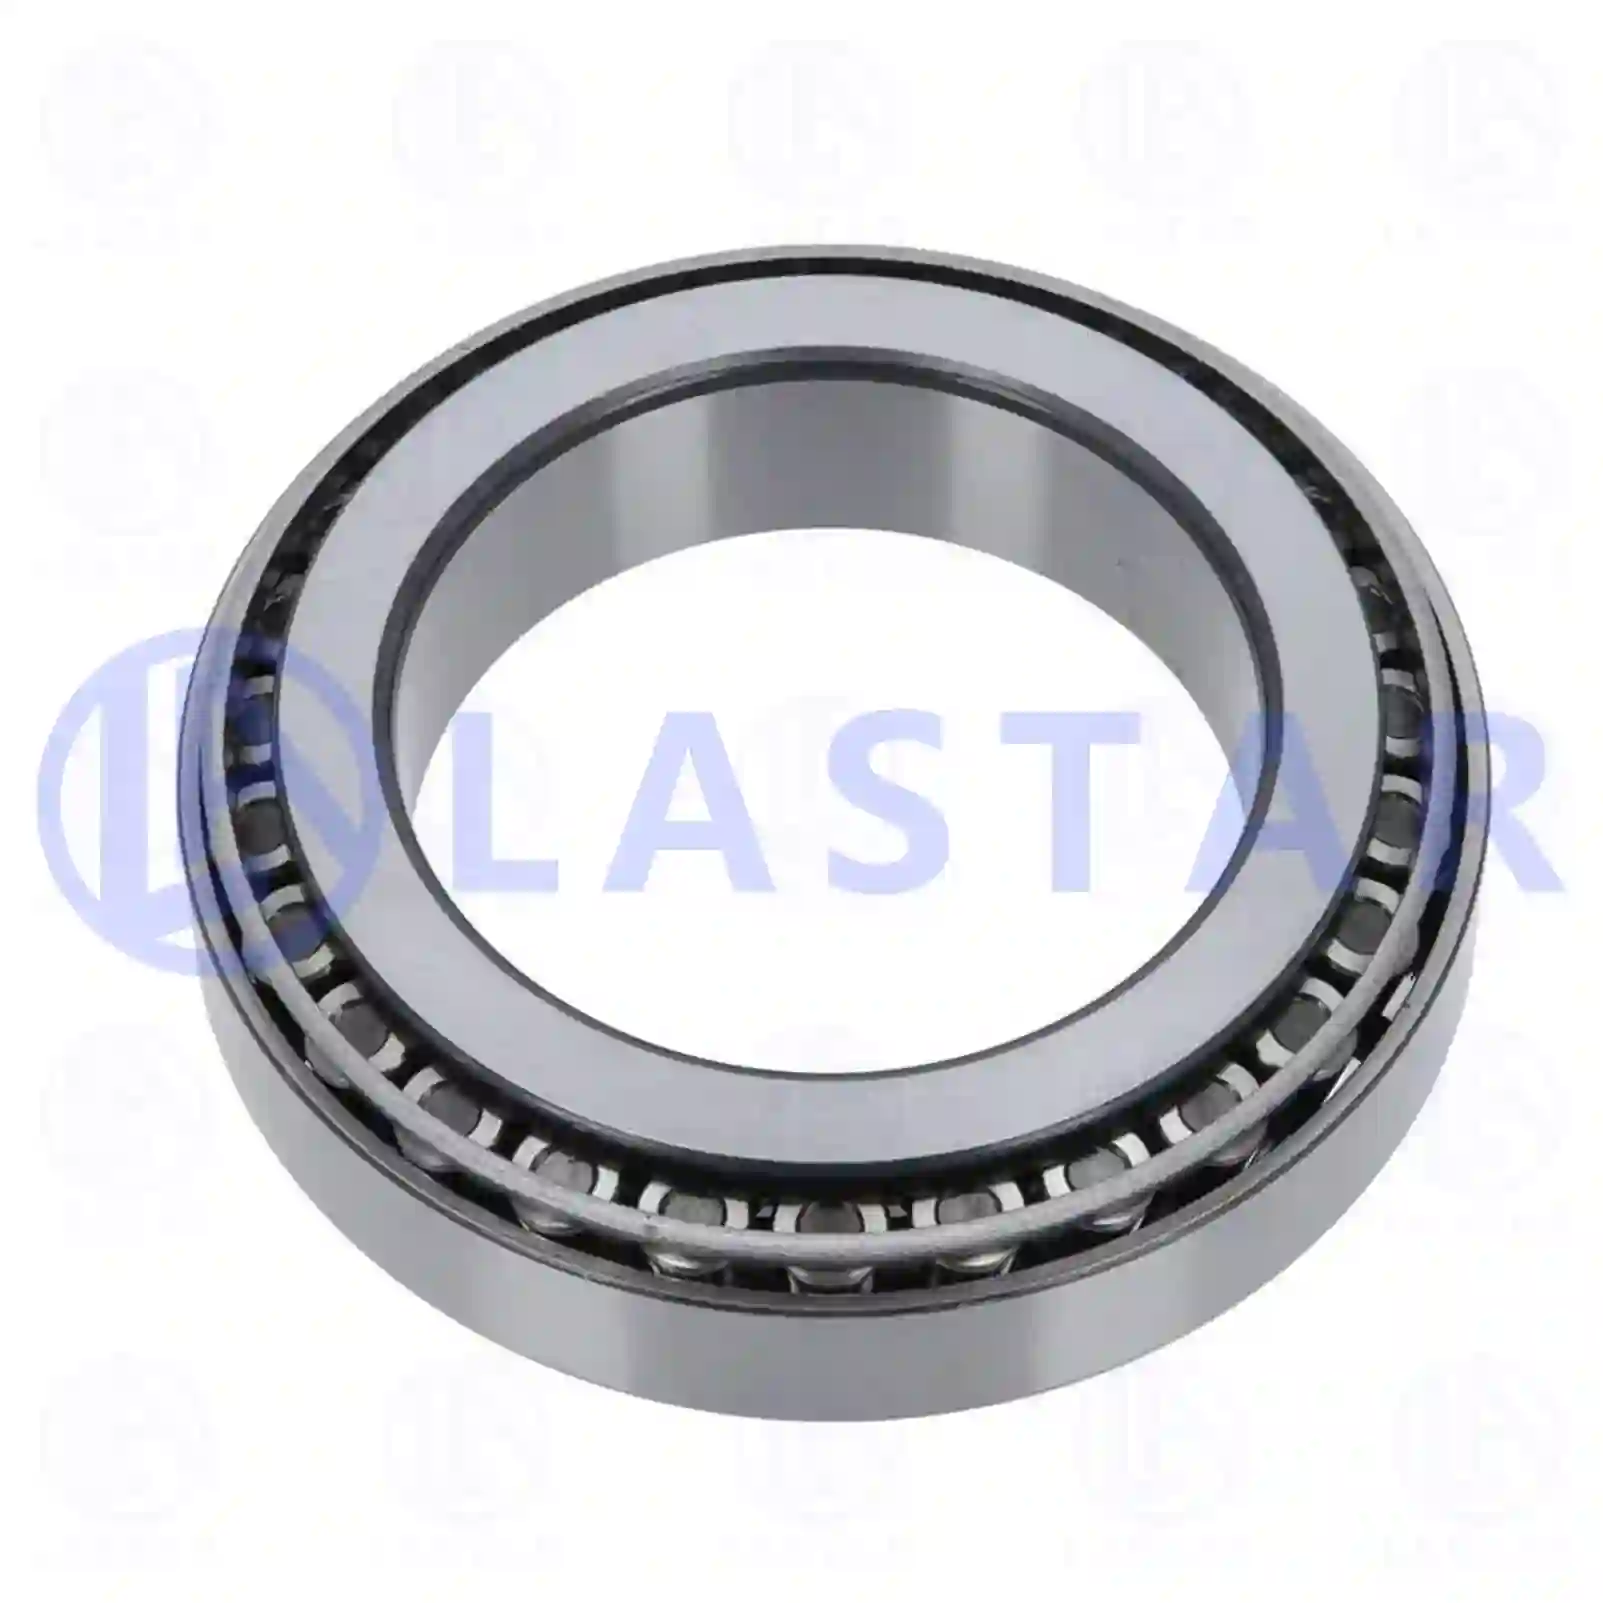 Tapered roller bearing, 77725311, 635584, CAL0856, 0003764595, 0003764595M1, 01102042, 01905219, 9437077, 01102042, 01103141, 01905219, 07173737, 07174013, 1102042, 1103141, 1905219, 06324801000, 81934200157, A5000052081, 0023336033, 5000055926, 32015XQ, 324714021000, 324741021000, 183735, 184068, ZG02983-0008 ||  77725311 Lastar Spare Part | Truck Spare Parts, Auotomotive Spare Parts Tapered roller bearing, 77725311, 635584, CAL0856, 0003764595, 0003764595M1, 01102042, 01905219, 9437077, 01102042, 01103141, 01905219, 07173737, 07174013, 1102042, 1103141, 1905219, 06324801000, 81934200157, A5000052081, 0023336033, 5000055926, 32015XQ, 324714021000, 324741021000, 183735, 184068, ZG02983-0008 ||  77725311 Lastar Spare Part | Truck Spare Parts, Auotomotive Spare Parts